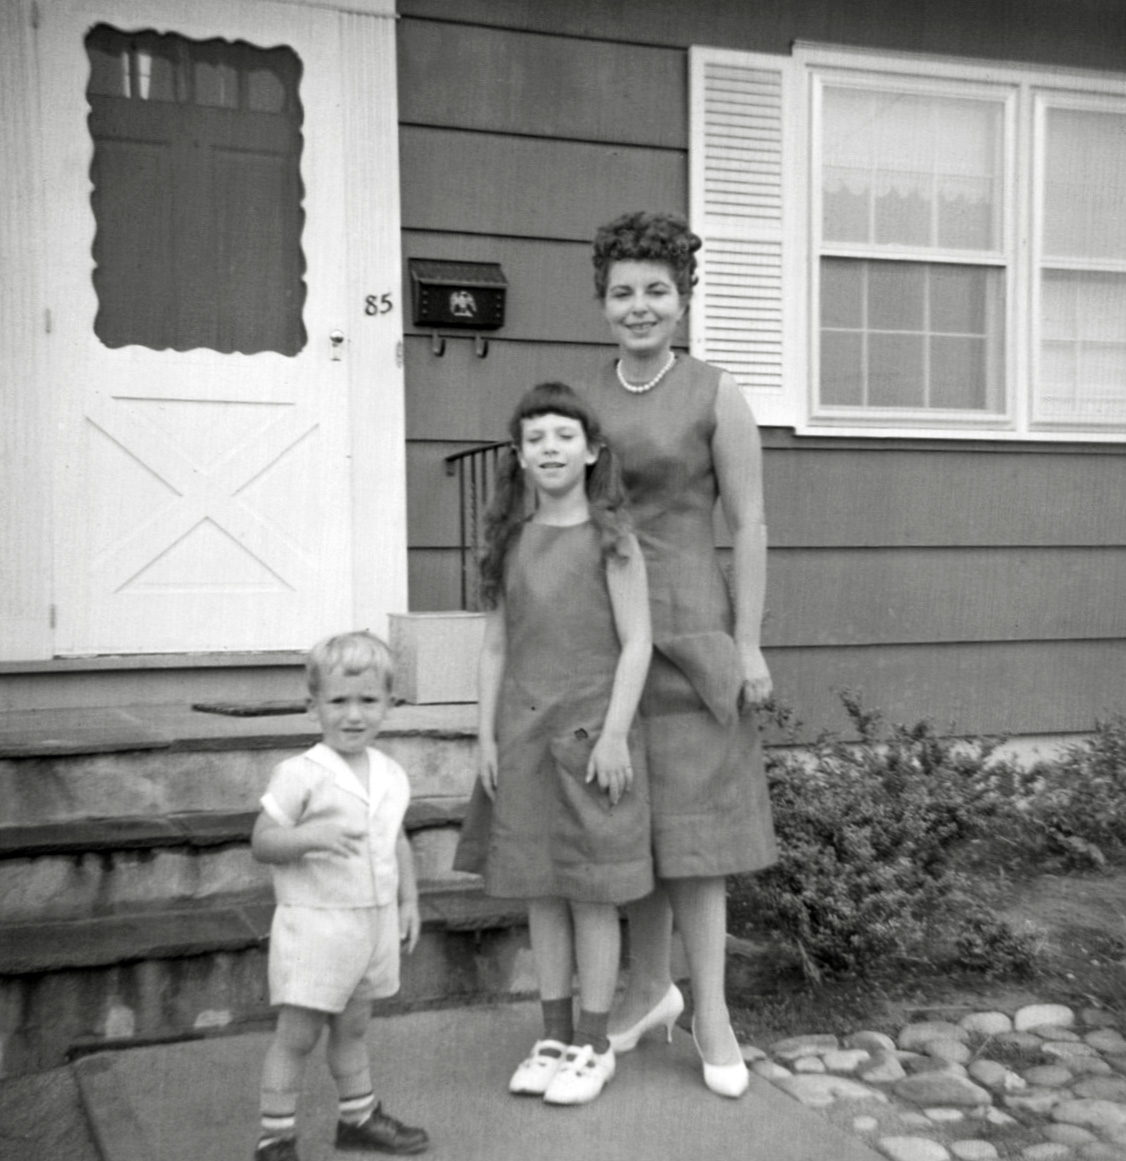 As I have said before, my mother was decidedly Mrs. Sewandsew. Along with making us matching RCA Picnic shirts in Princeton, she made matching red dresses for her, me, and a tiny one that was an exact replica of ours for my Barbie doll. These were not special occasion clothes. They had great big pockets with pointed tops (since she knew I would wear, and wear, and wear anything with a big pocket for me to stash stuff in) and were of a pattern she designed which she identified as princess line. And yes, the faux pearl beads, and medium heels were the way she dressed on a regular day. She did not have house dresses or cleaning house clothes. 

Baby boomers will recognize the square object on the steps that you can see between me and my brother as a milk box. Each morning a man from a local dairy company delivered fresh milk to our house, using it. 